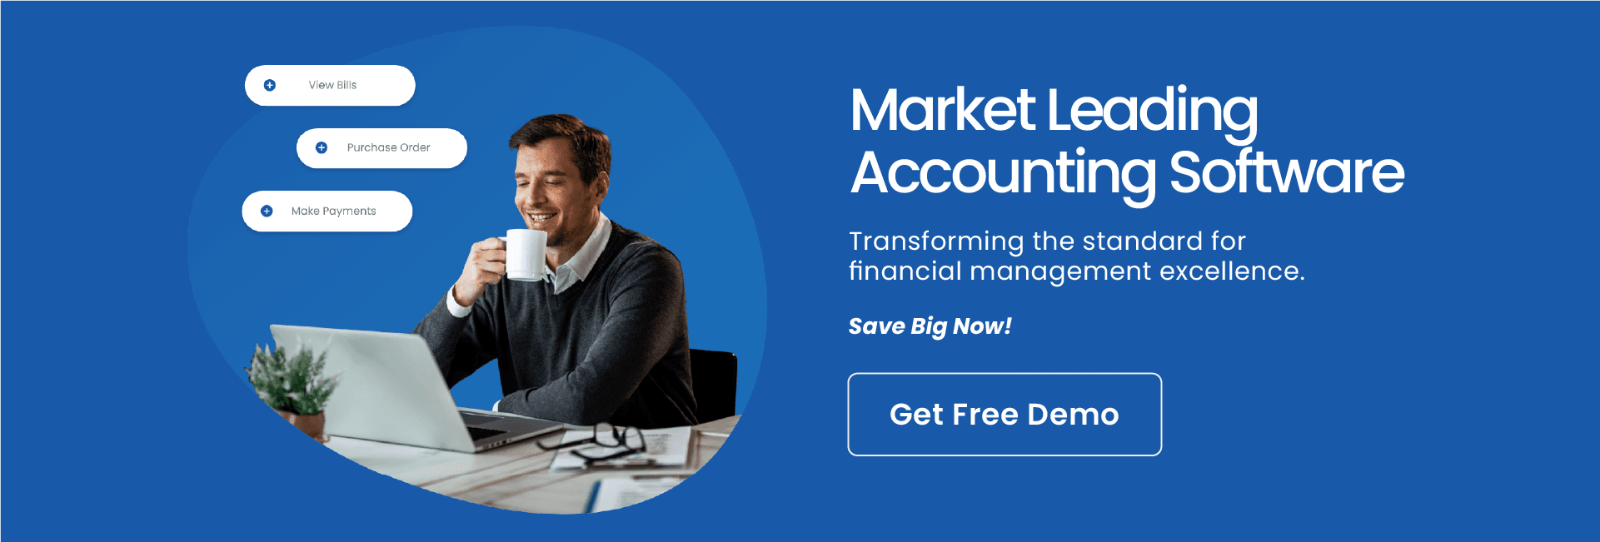 market leading accounting software